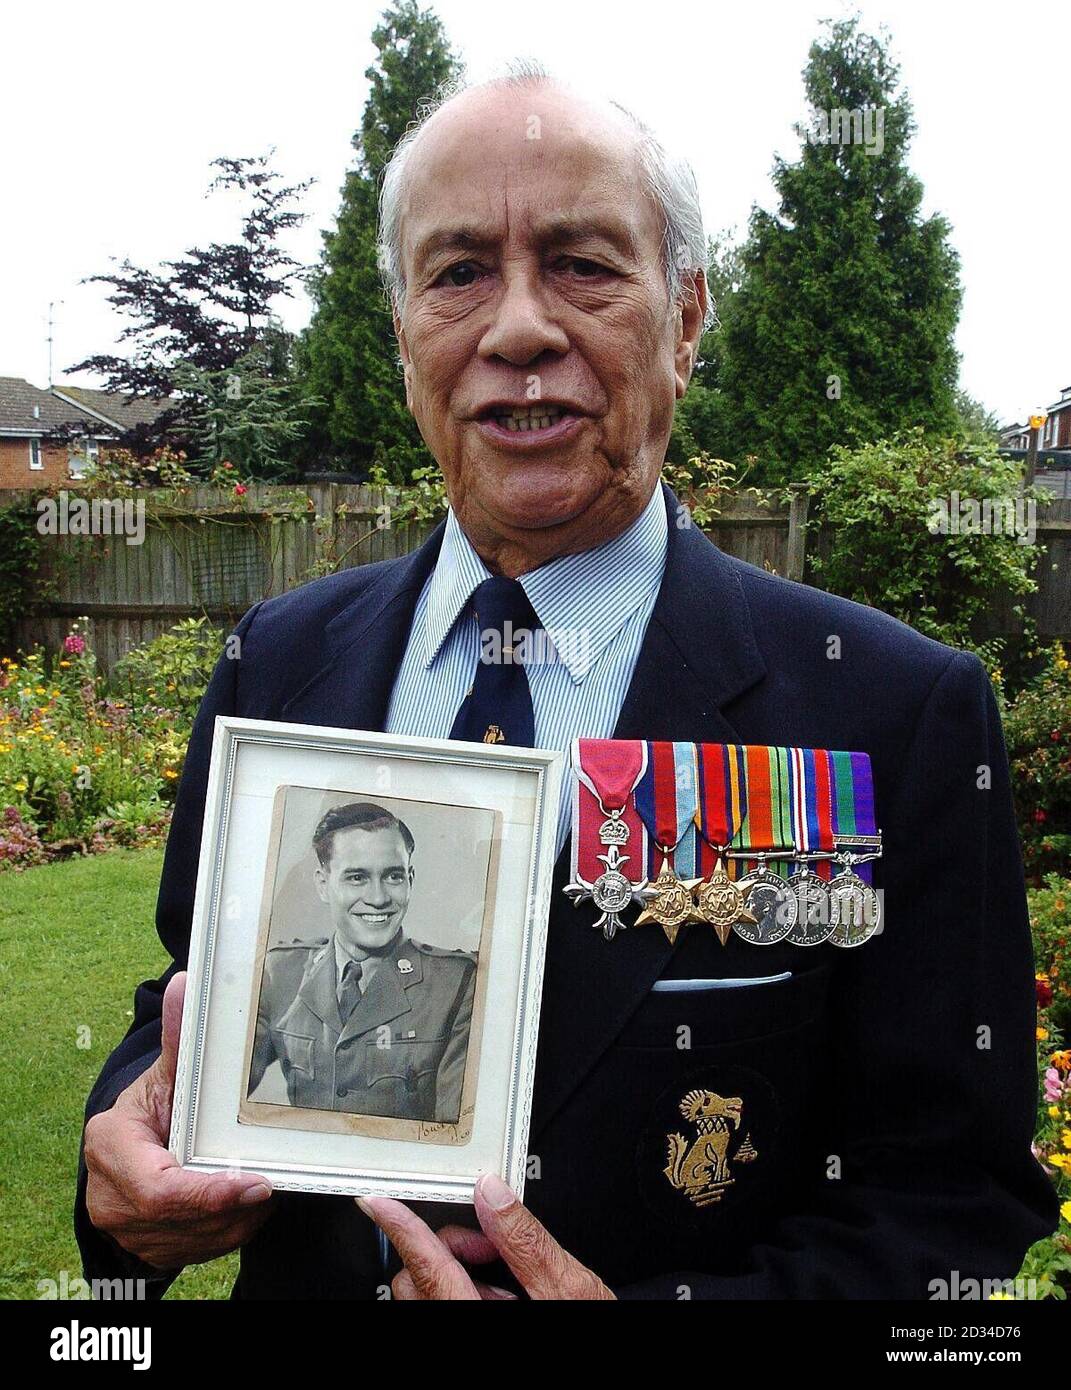 Major Neville Hogan, 84, a former Chindit soldier in Burma holding a photo  of himself as a young soldier, at his home in Hemel Hempstead,  Hertfordshire. Burmese-born Hogan was just 16-years-old when